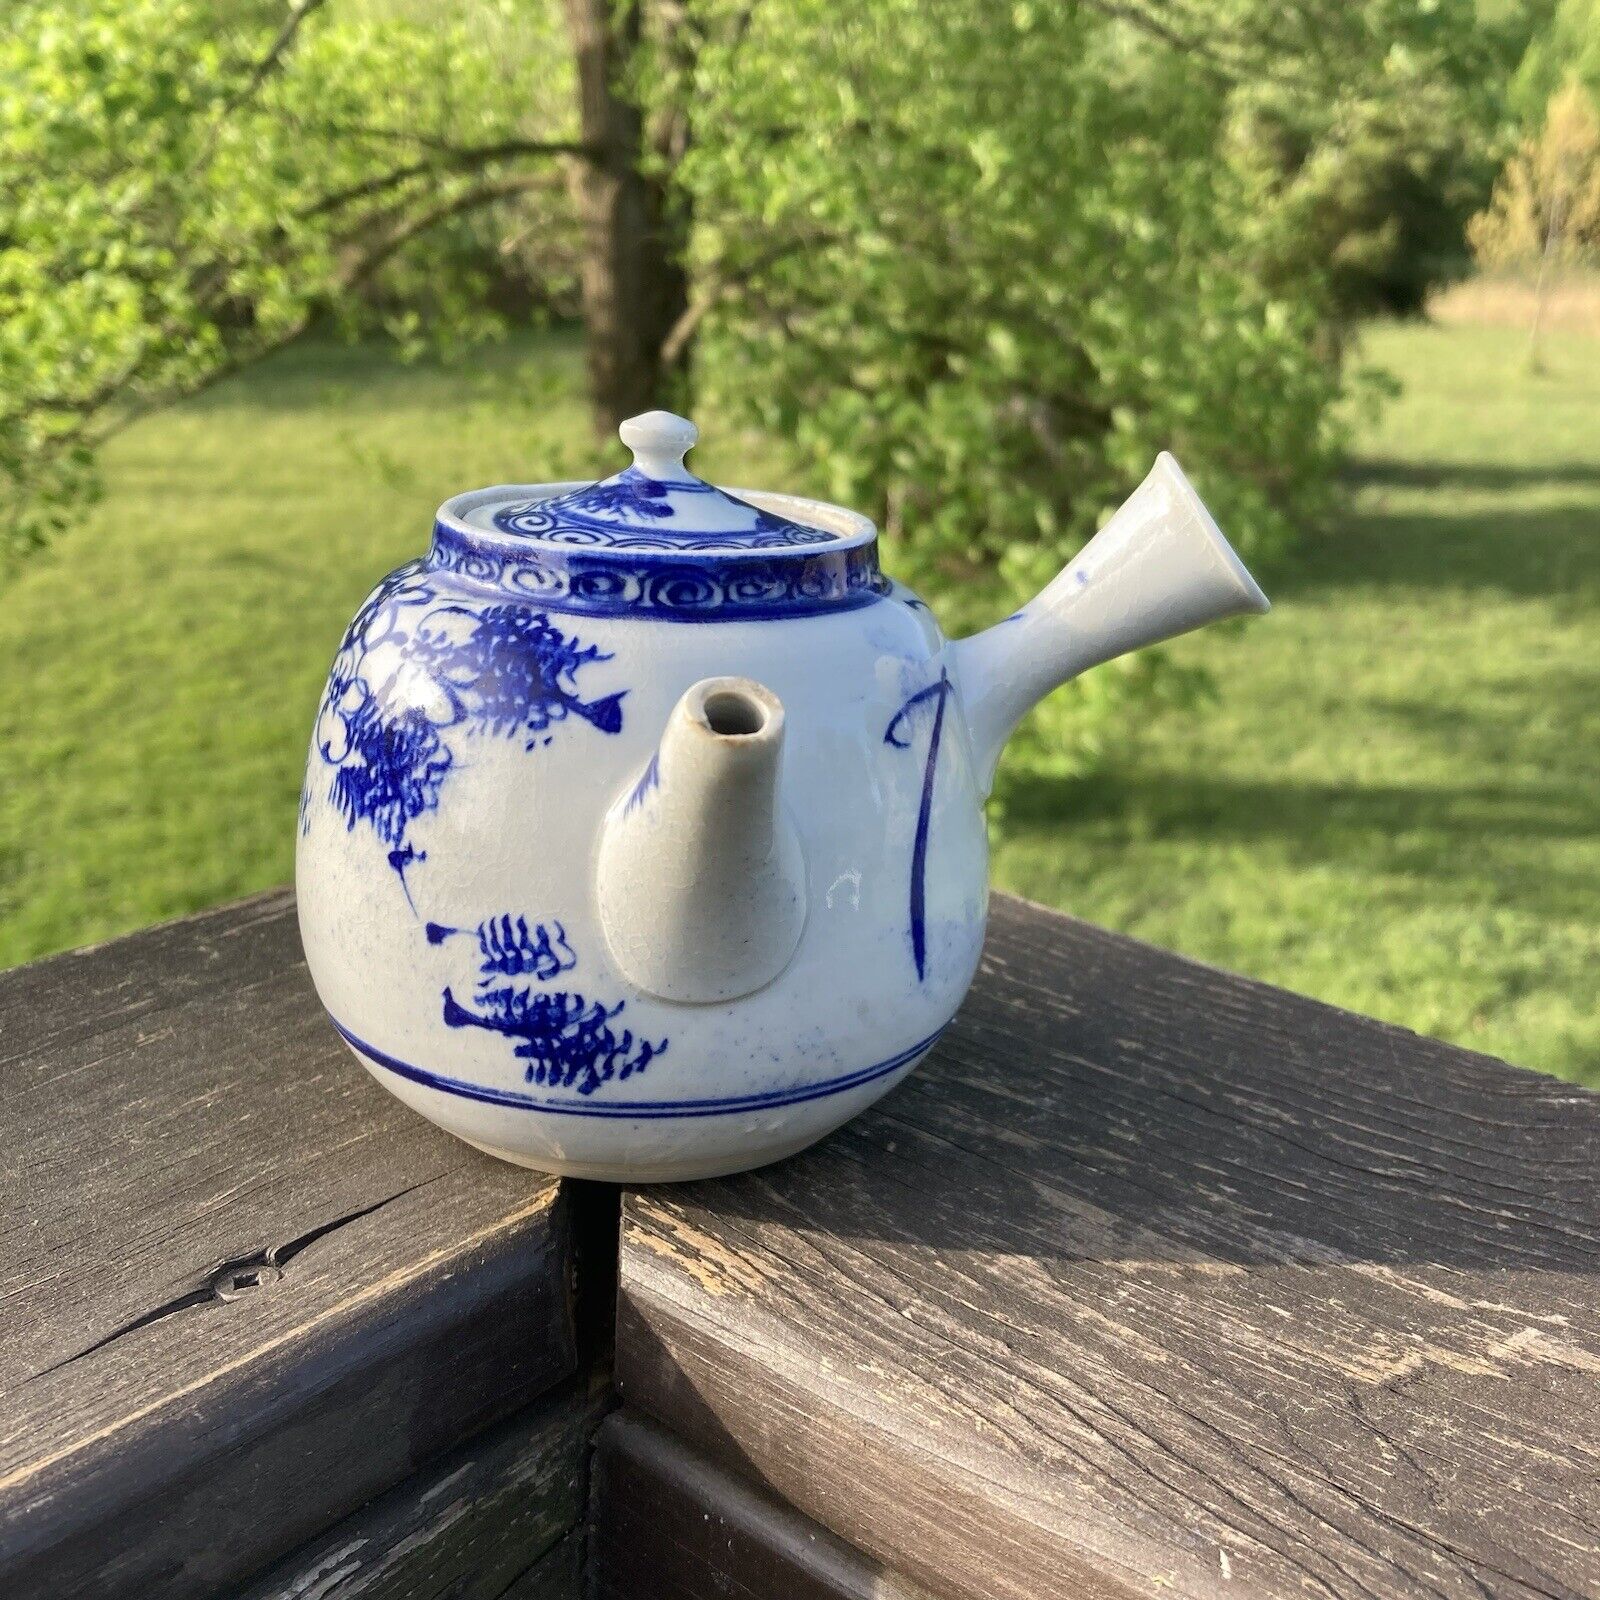 Vintage Small Kyusu Kiln Tea Pot With Infuser And Lid Blue And White Pottery